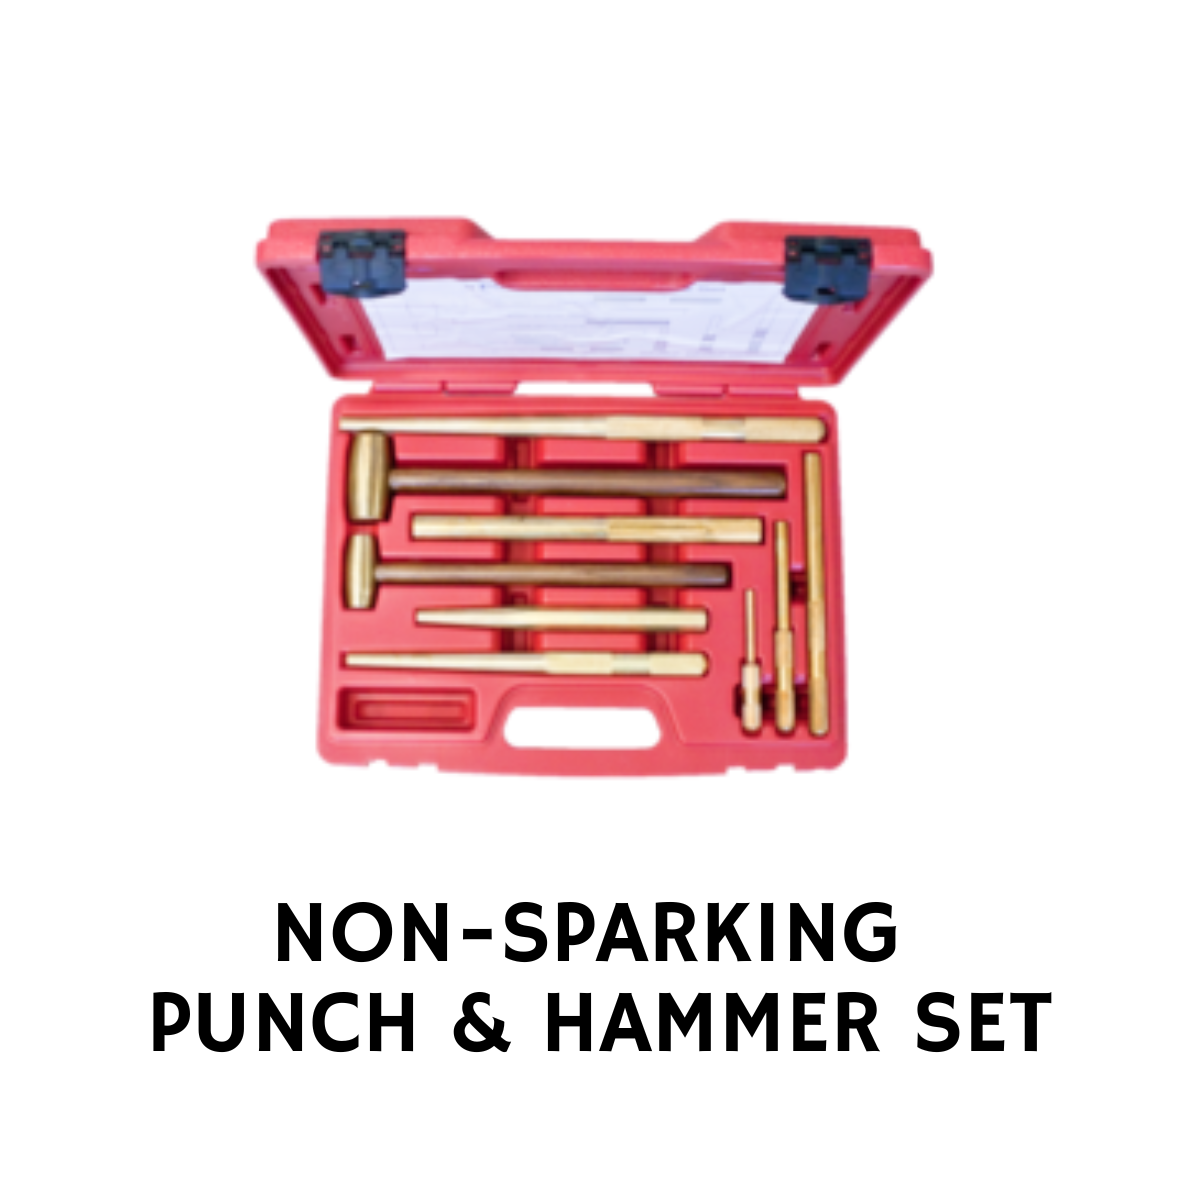 NON-SPARKING PUNCH AND HAMMER SET